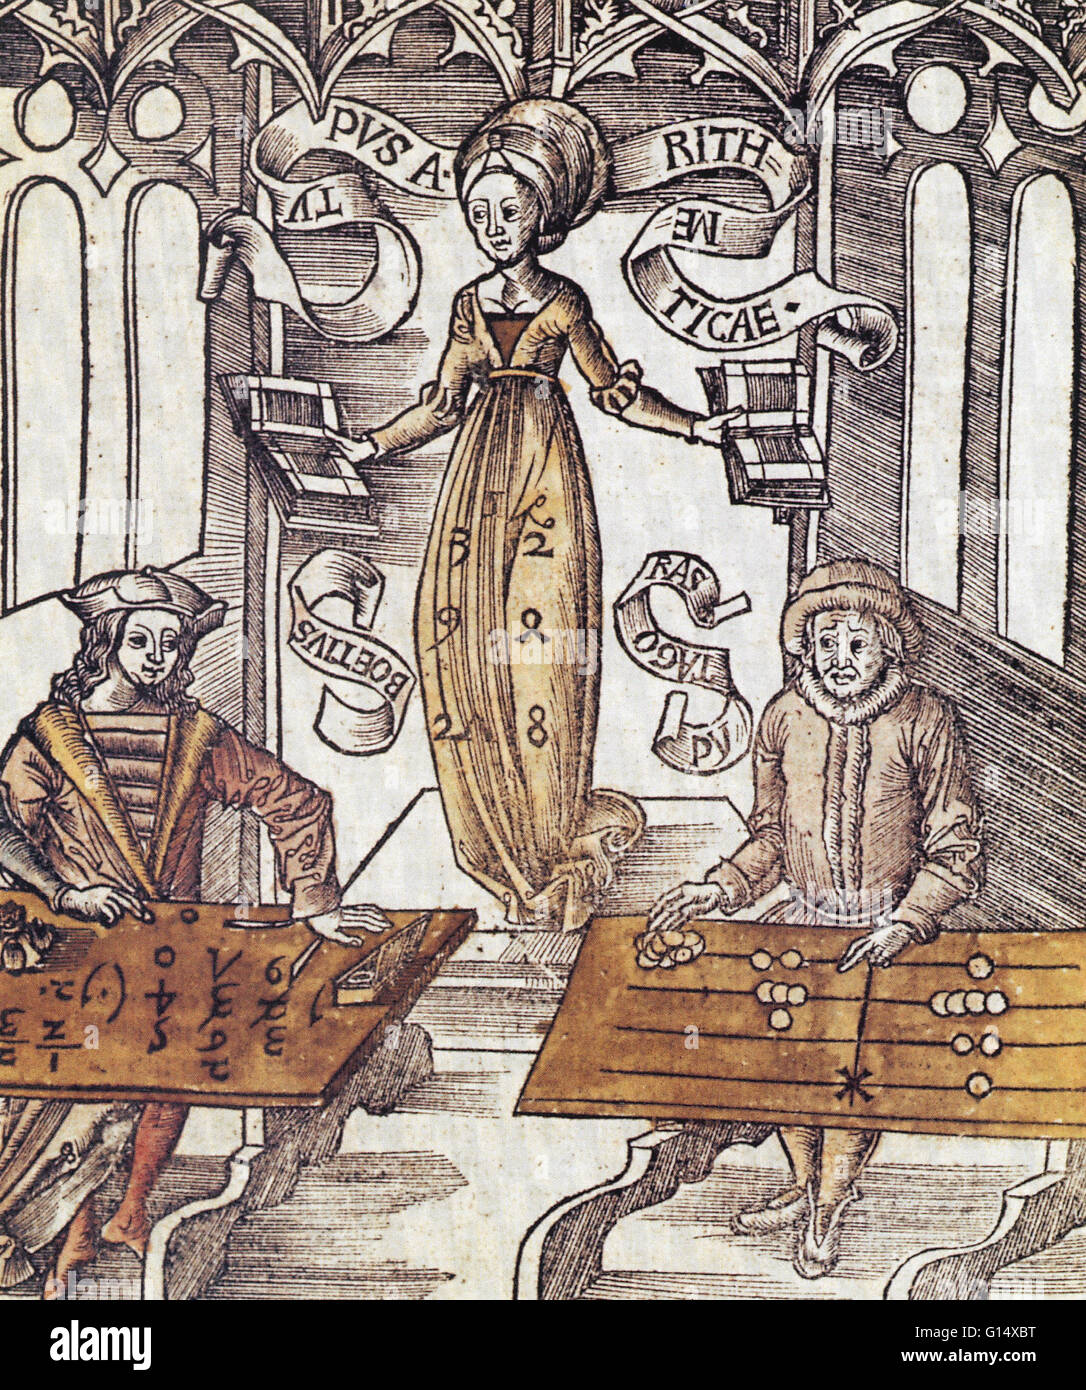 The triumph of arithmetical algorithms over the conventional abacus for calculation. Classic woodcut of Arithmetica (or the Allegory of Arithmetic) supervising a contest between Boëthius, representing written calculation using Hindu-Arabic numbers, and Py Stock Photo